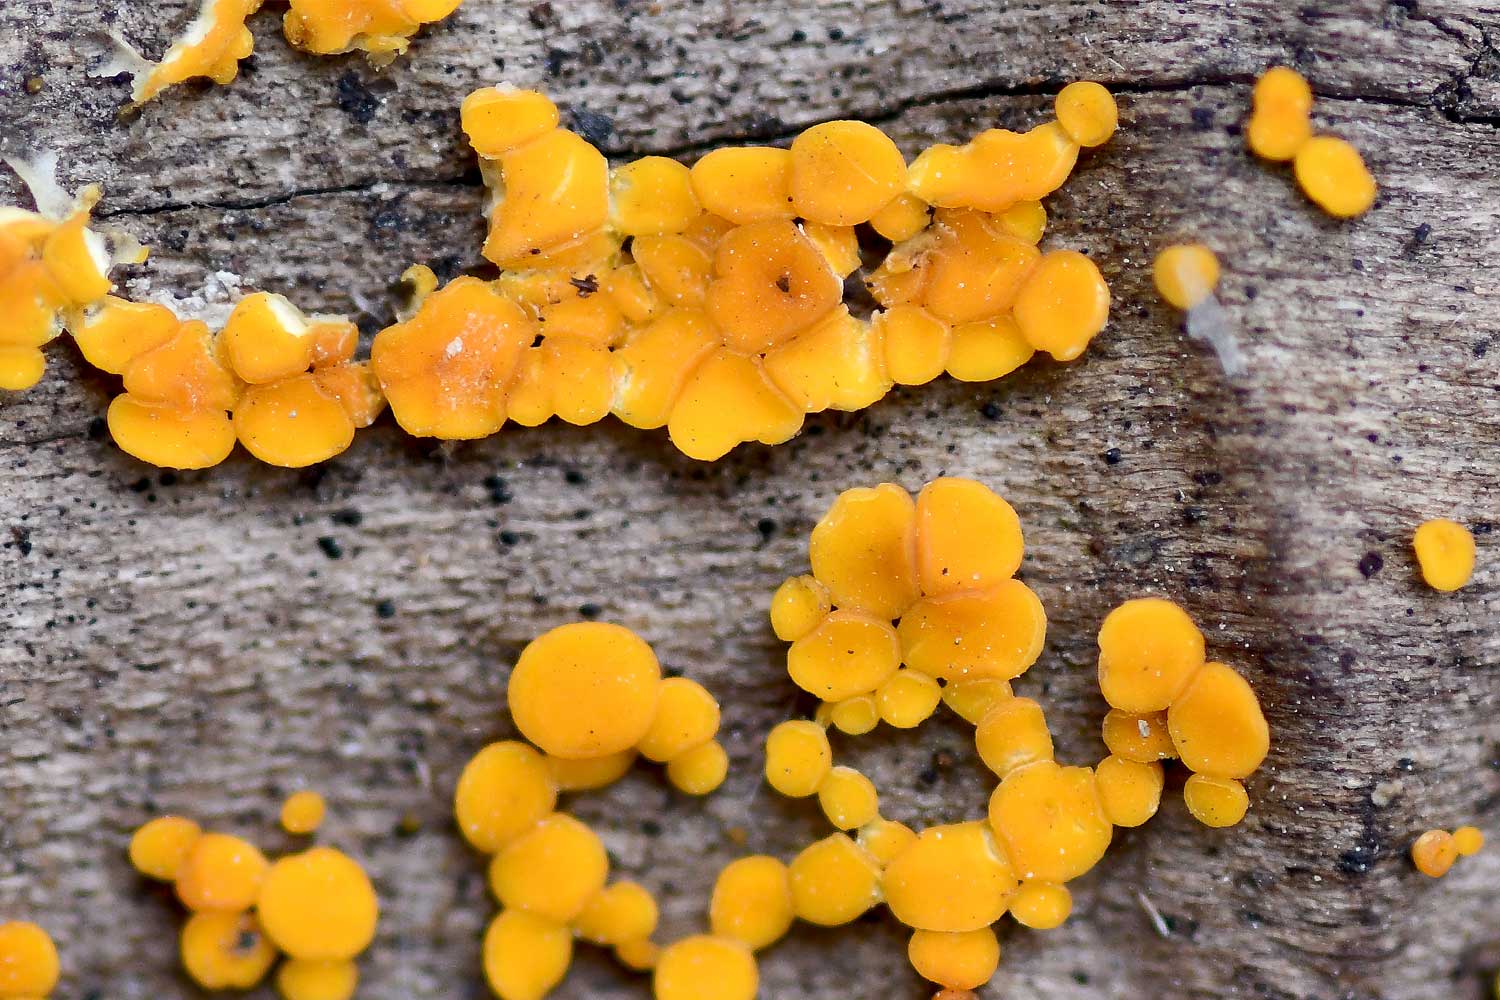 Yellow fairy cup fungus on a log.